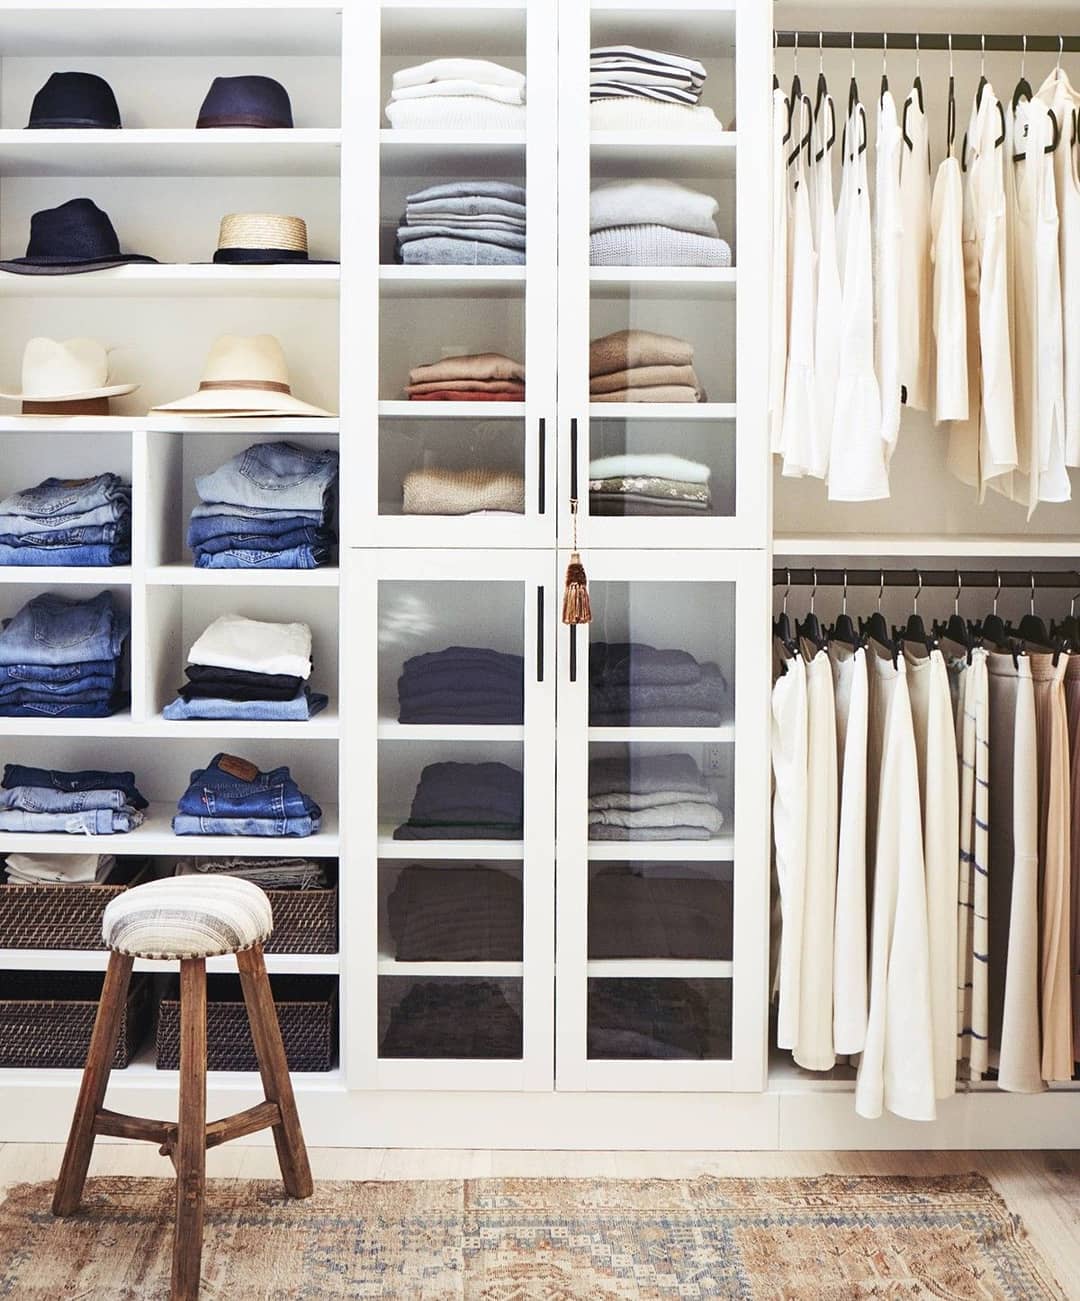 Closet Filled with Clothes, Pants, and Hats. Photo by Instagram user @jamienaugleinteriors